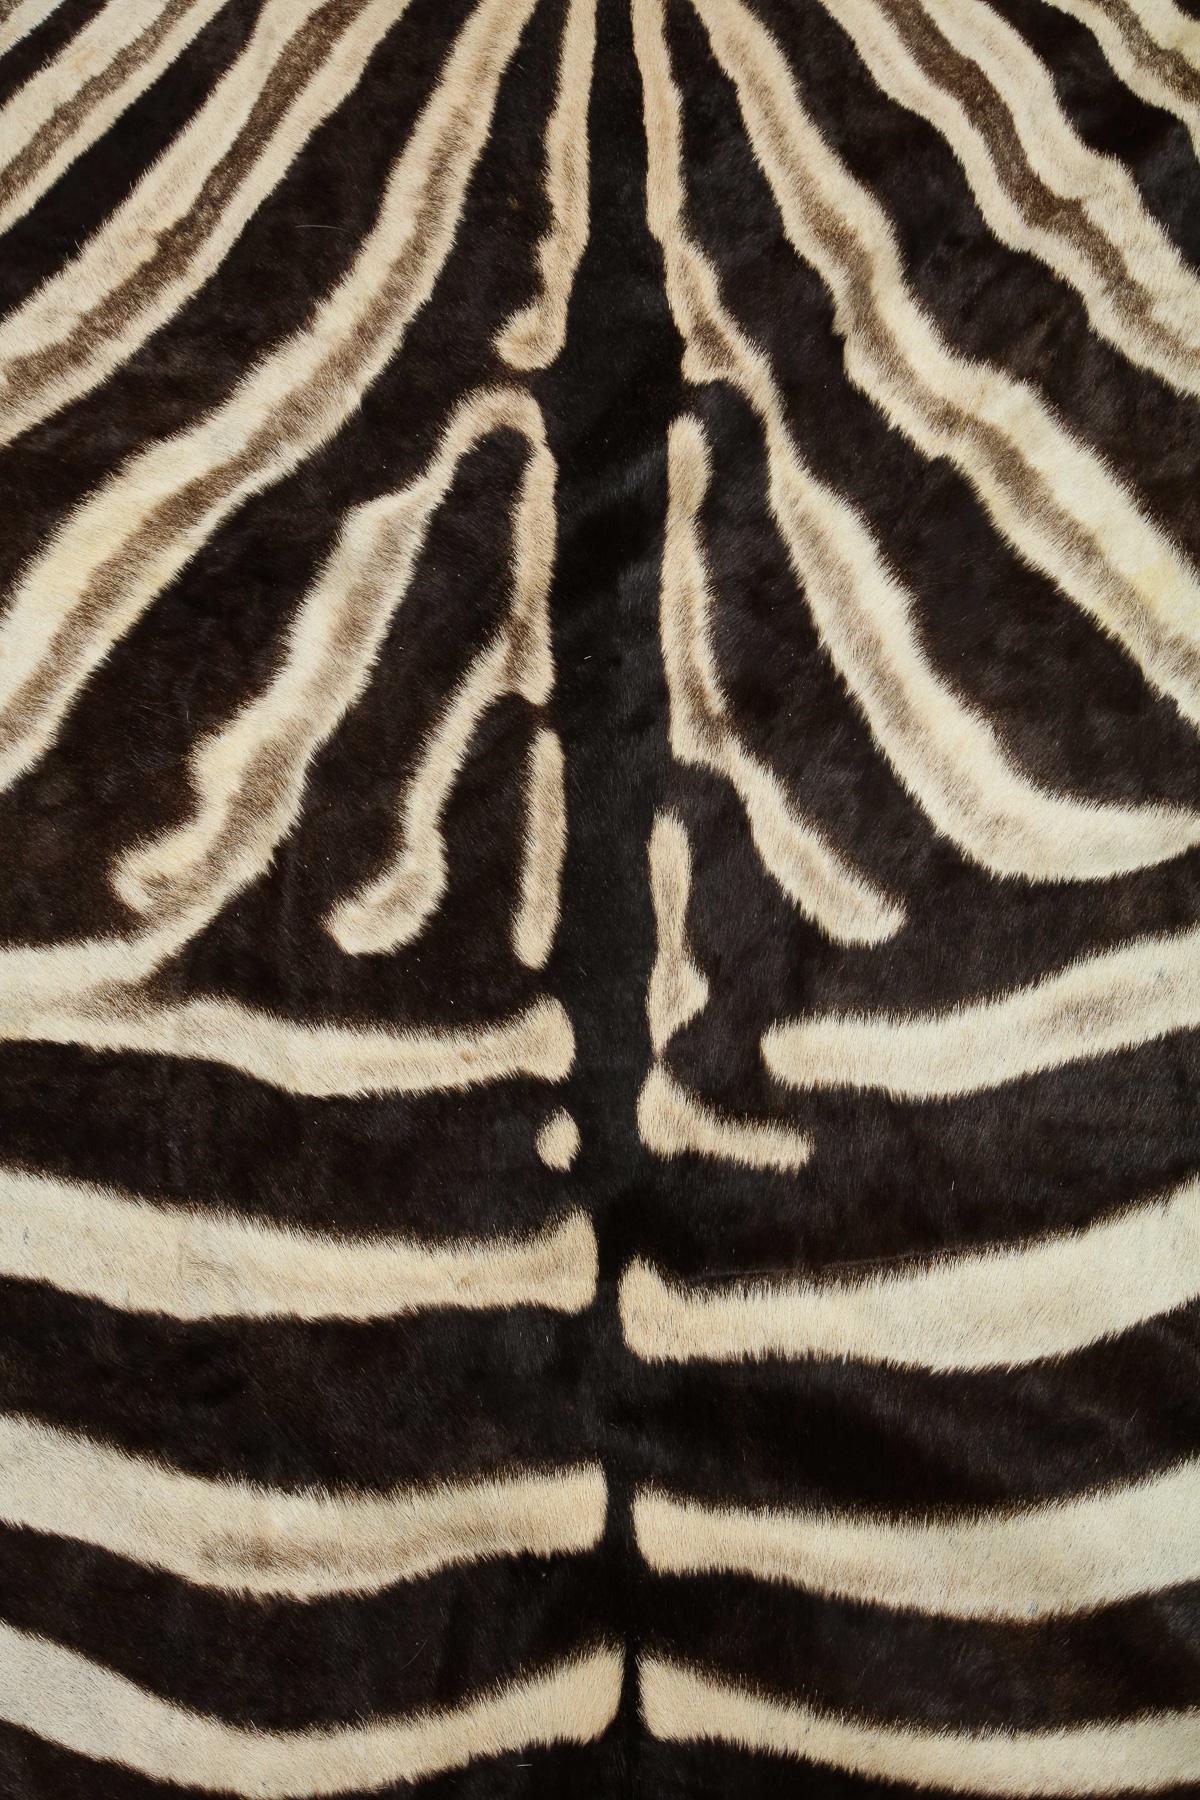 Campaign Zebra Hide Rug, Chocolate Brown from South Africa